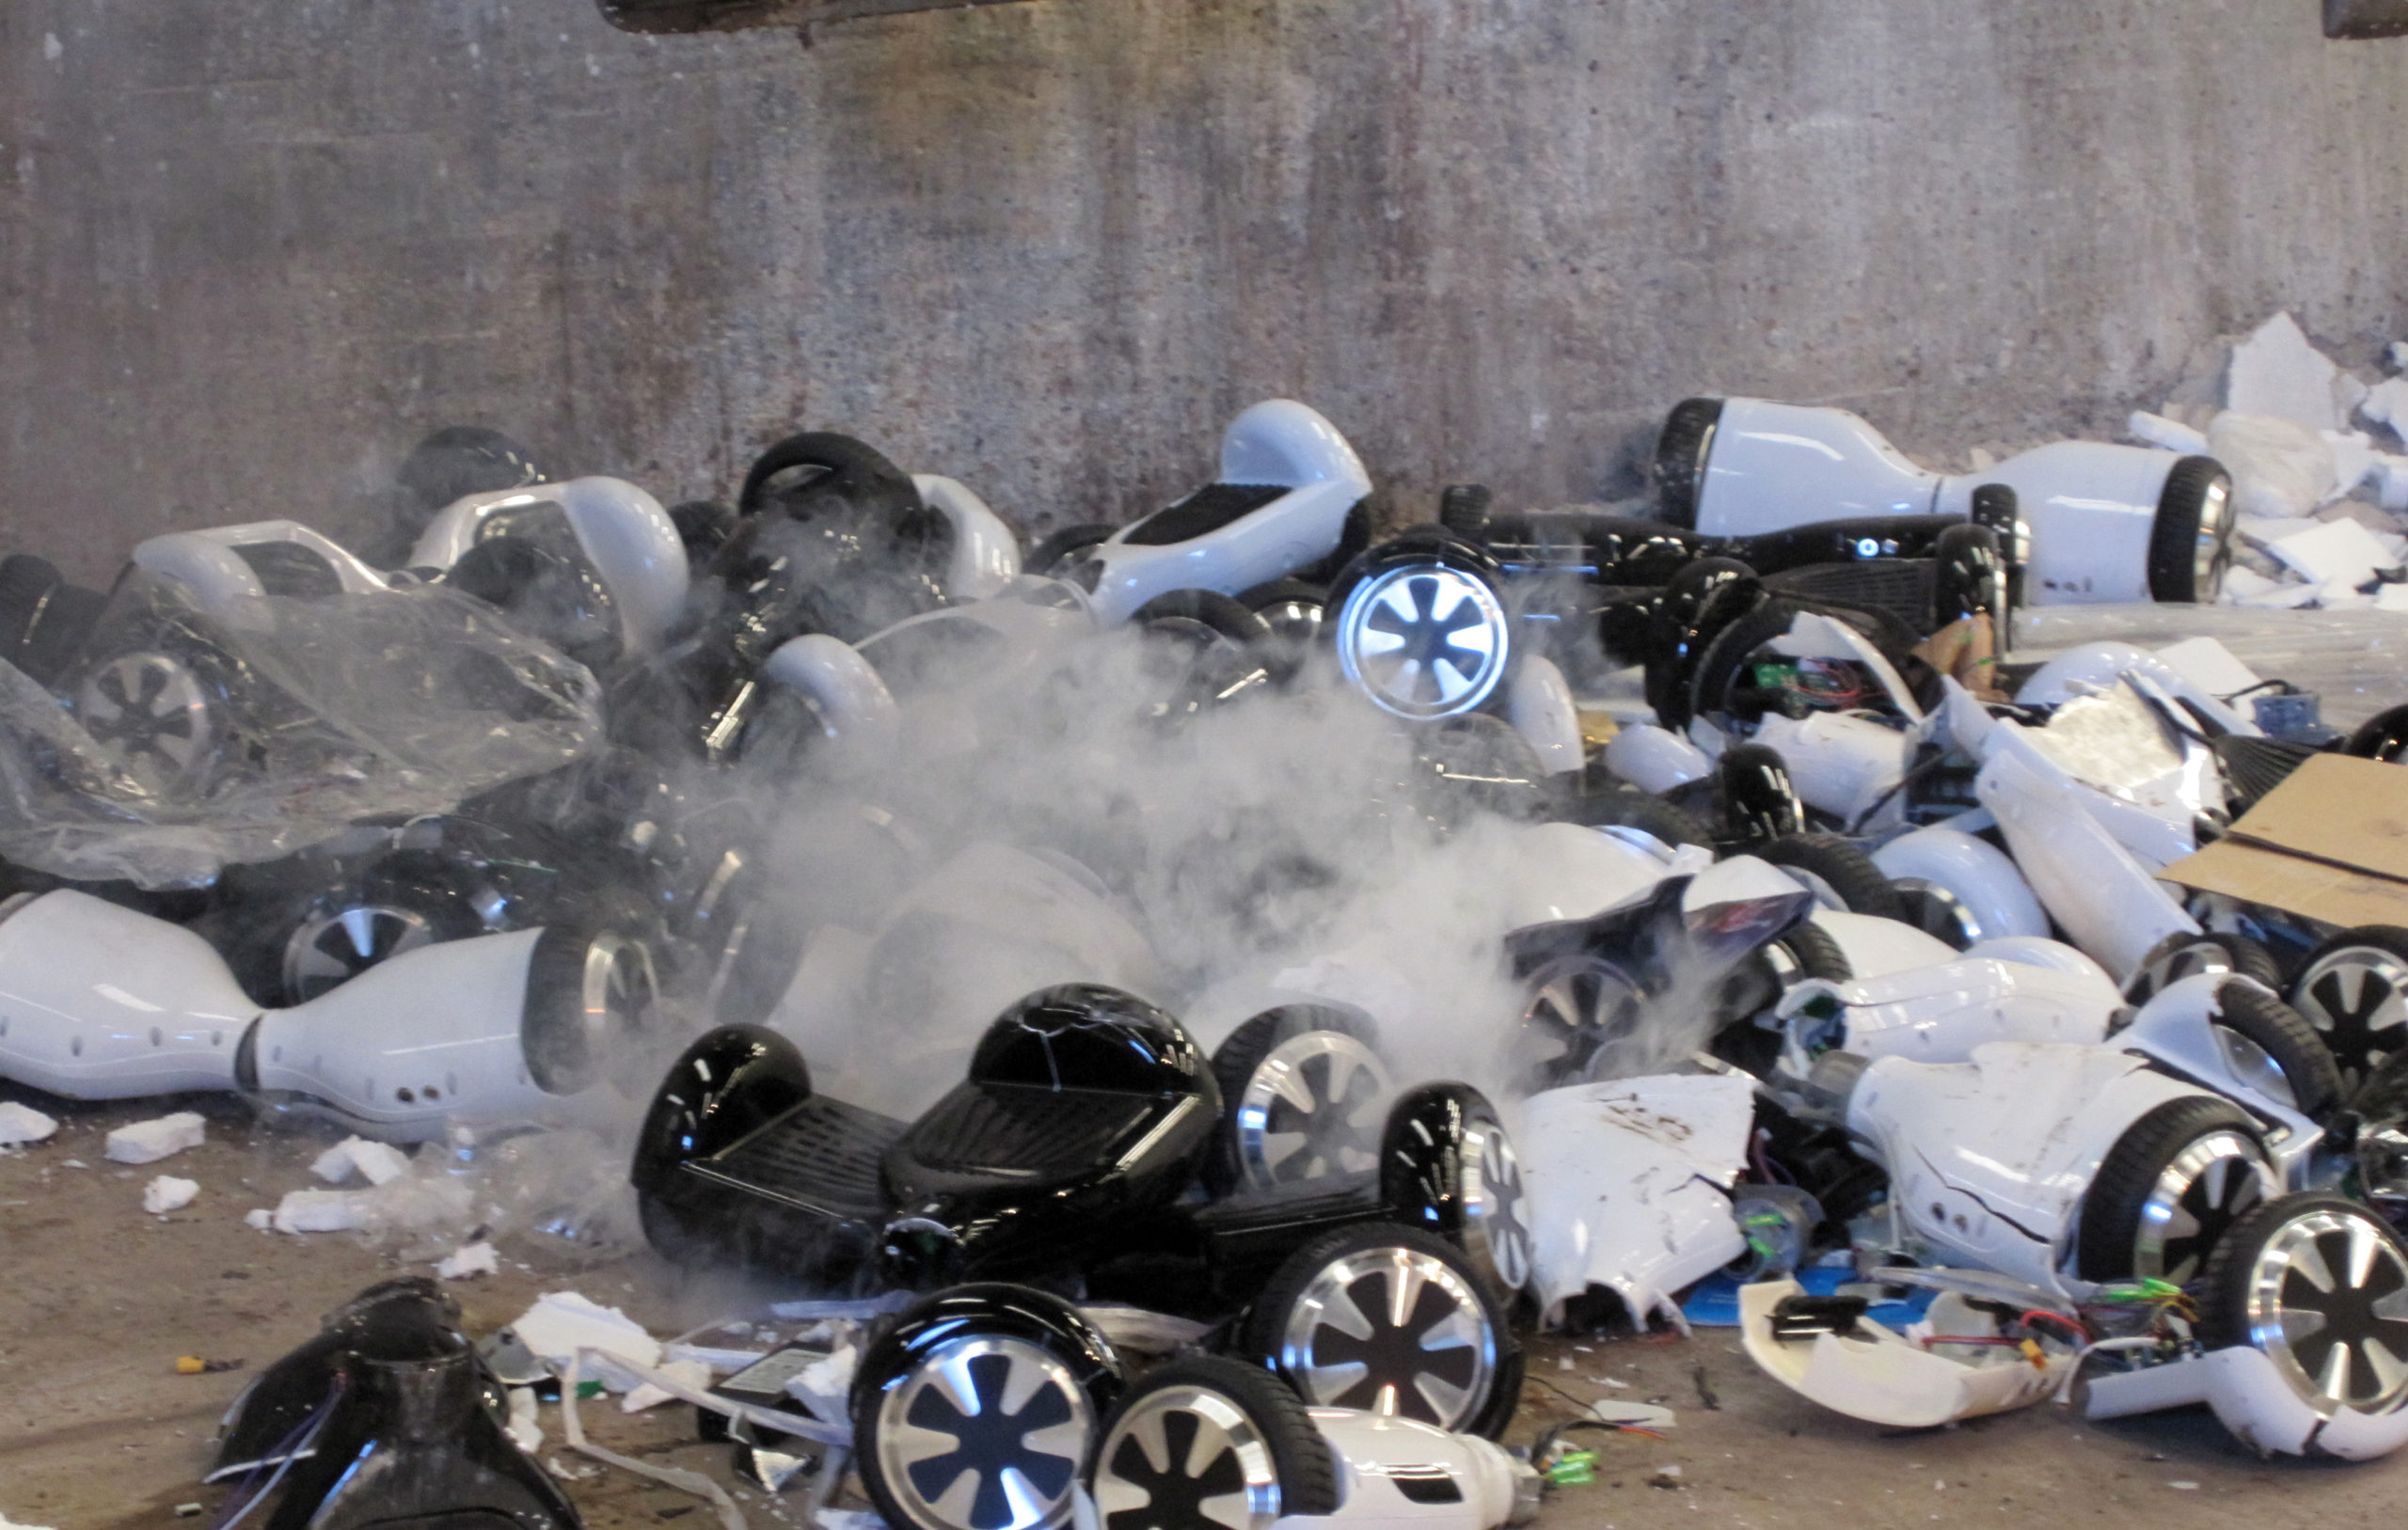 Feast Your Eyes On The Glory Of 90 Hoverboards In A Giant, Exploded Pile